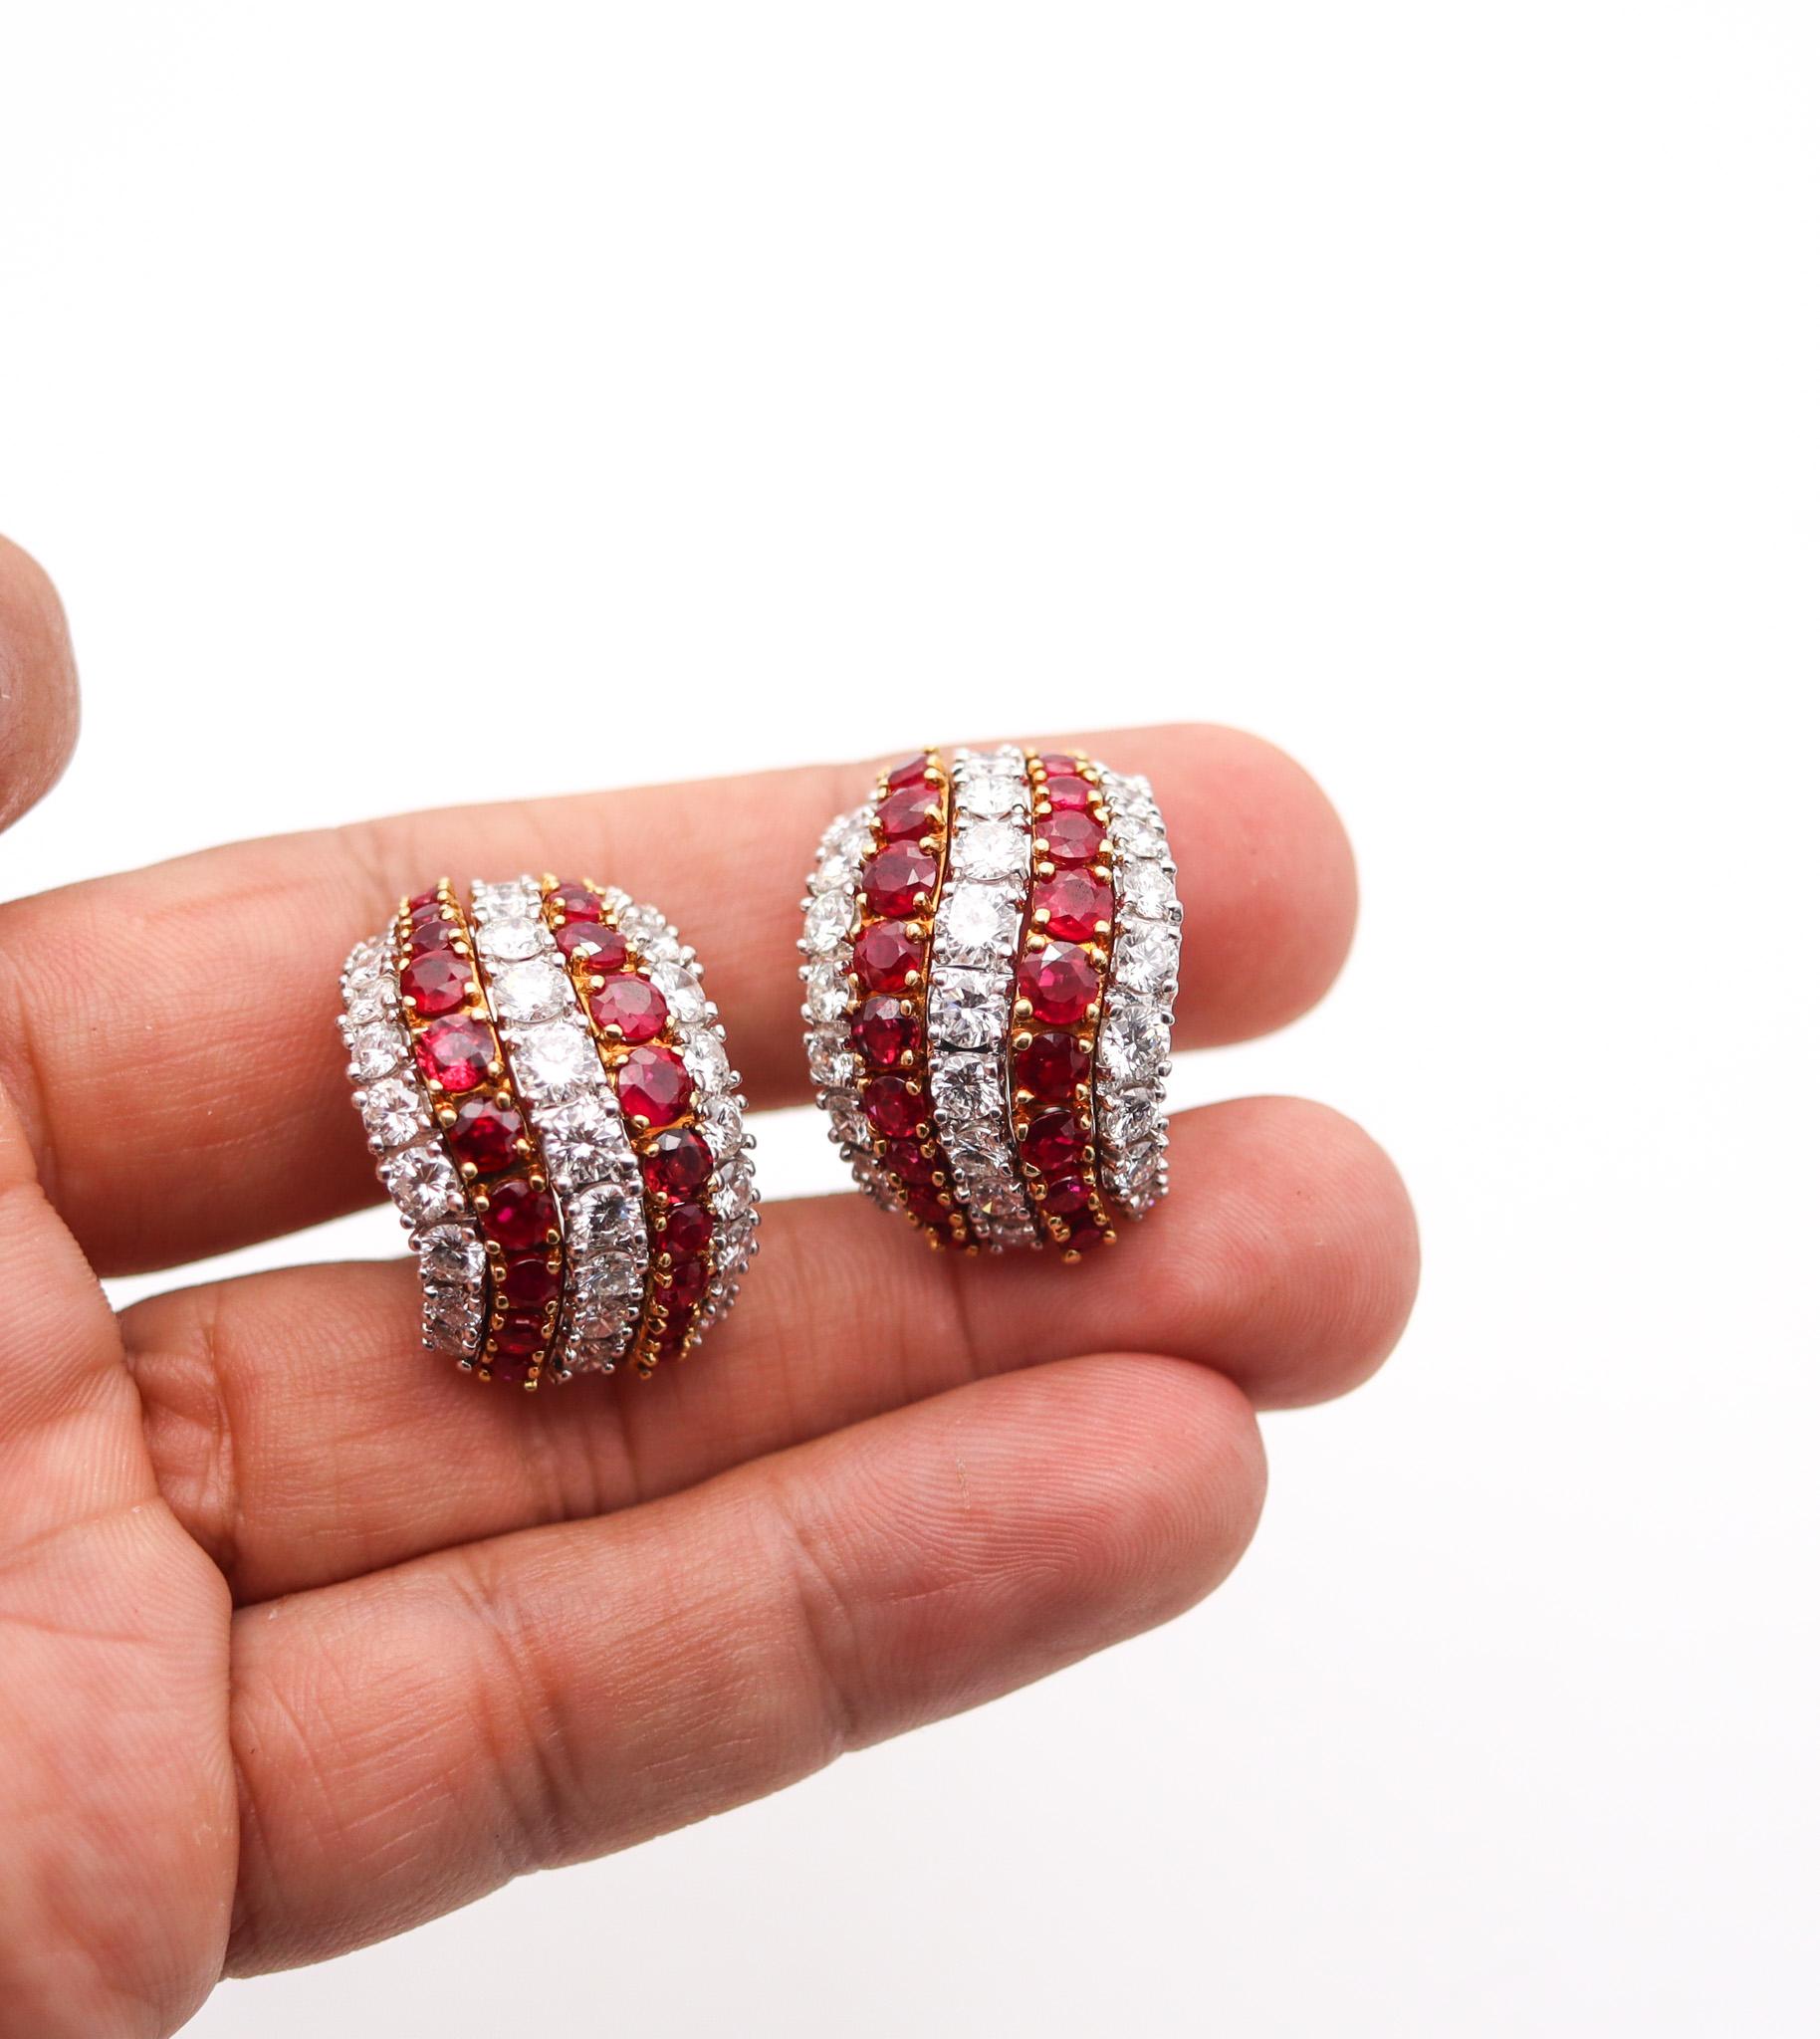 Kutchinsky 1970 Clip Earrings 18Kt Gold Platinum And 21.02 Ctw Diamonds & Rubies In Excellent Condition For Sale In Miami, FL